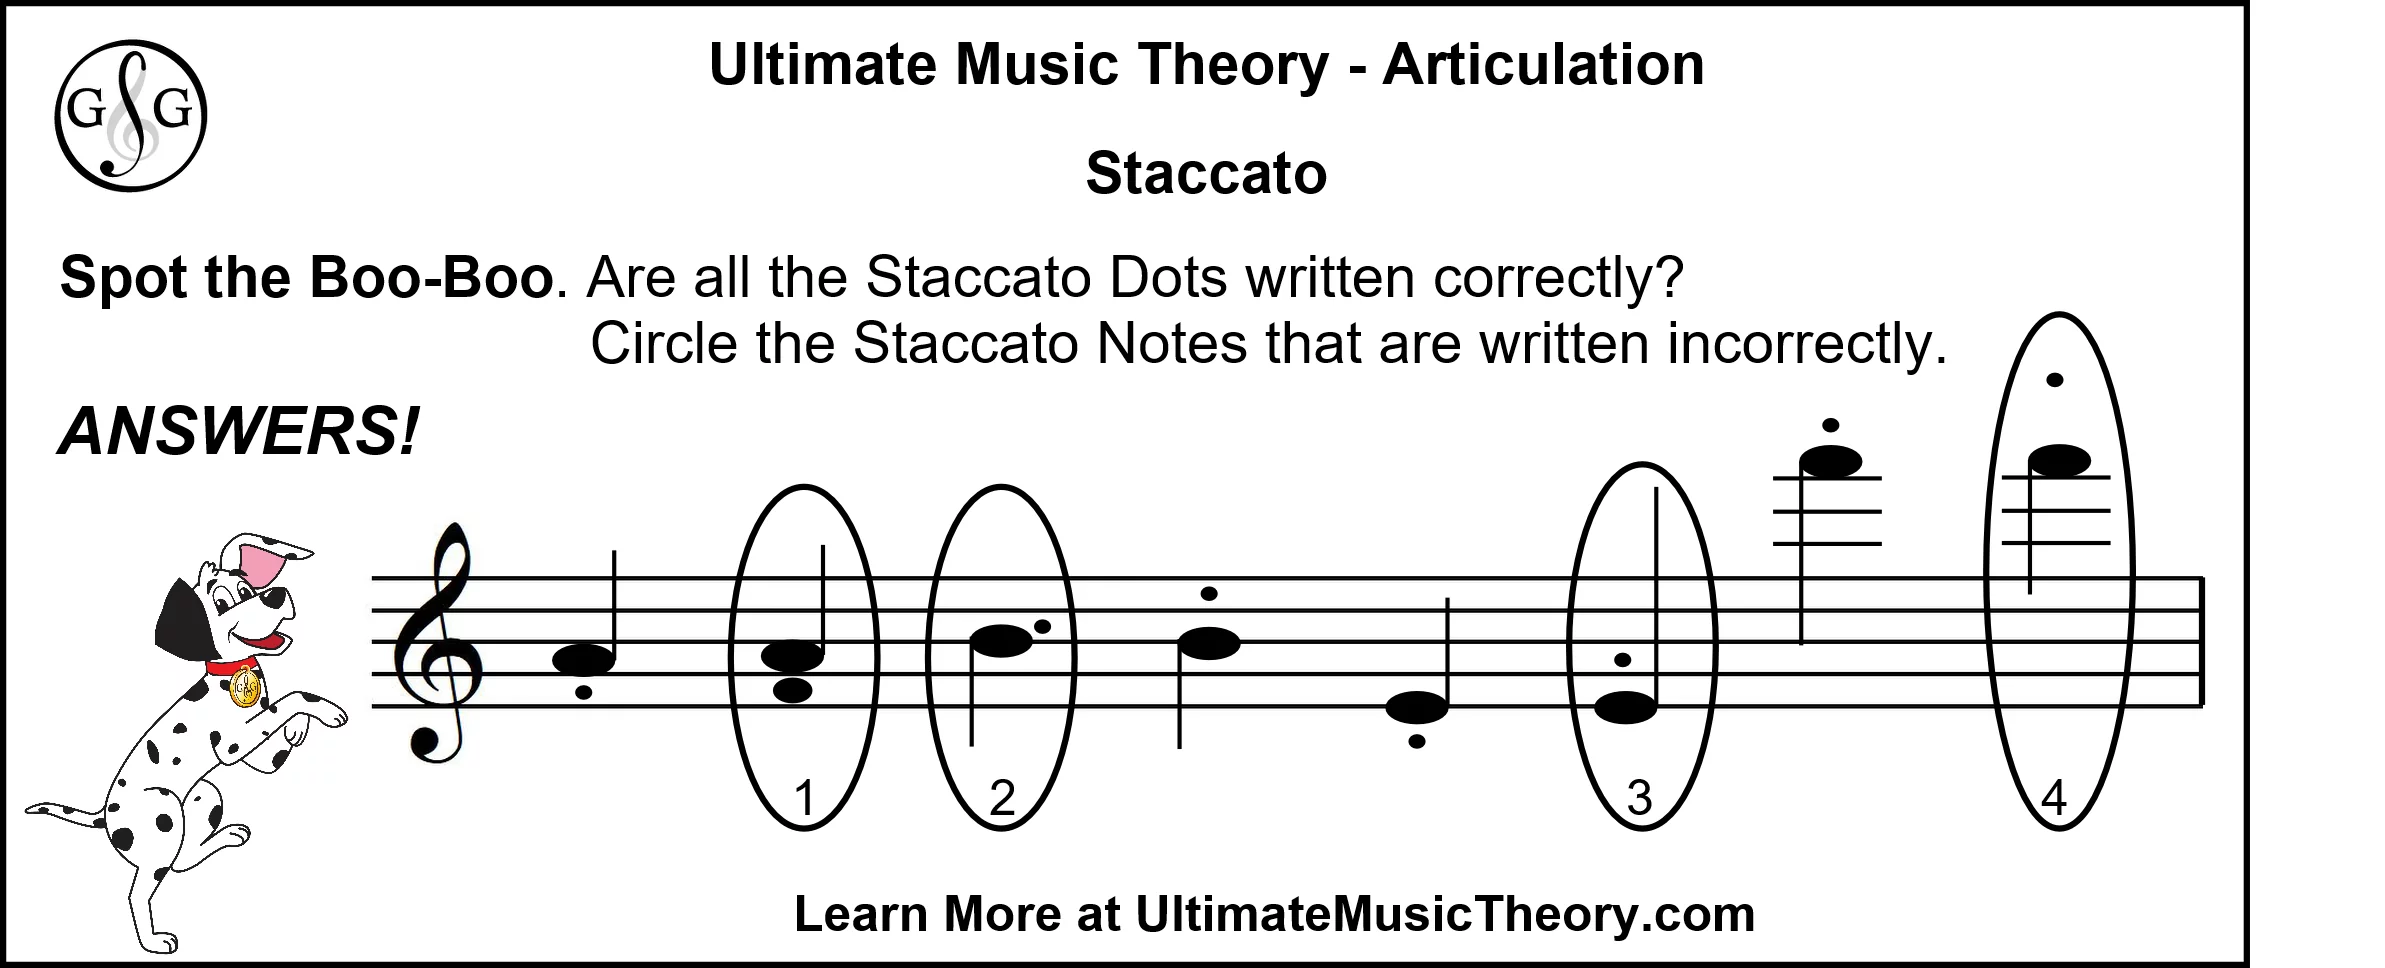 UMT Articulation Staccato Pop Quiz Answers